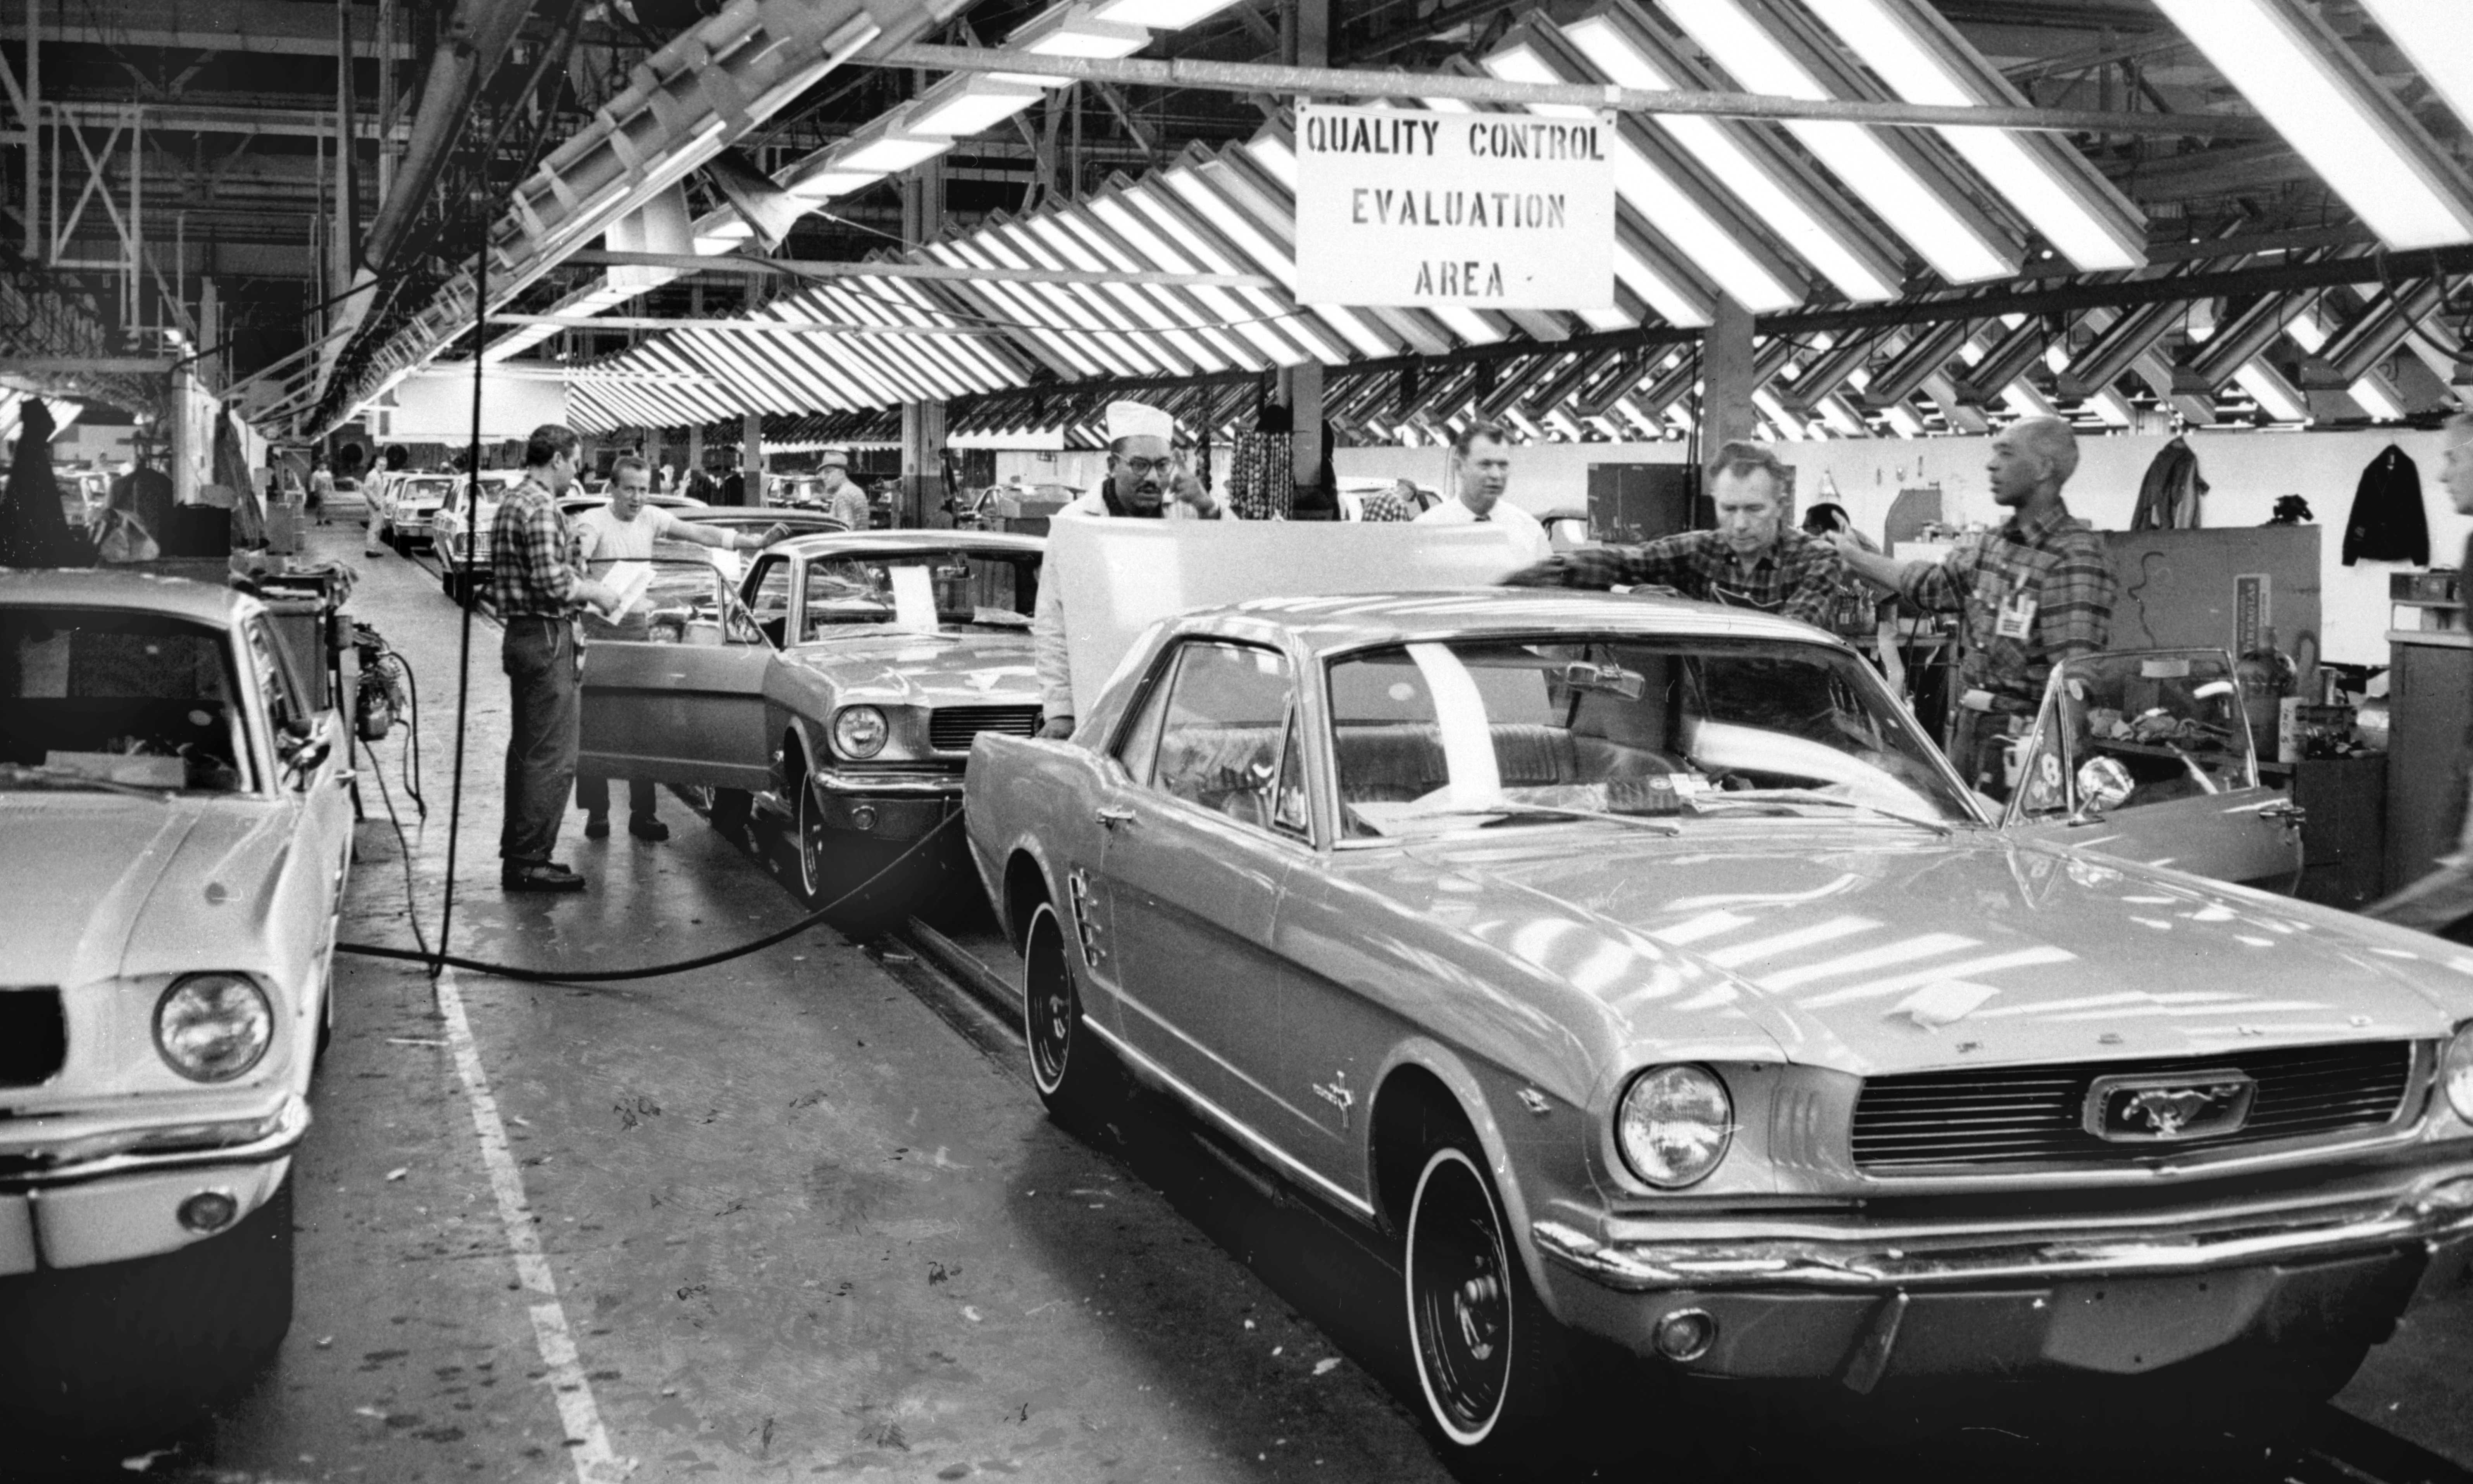 Ford Mustang, Question of the Day: What is your opinion of the 1965-1966 Ford Mustang?, ClassicCars.com Journal